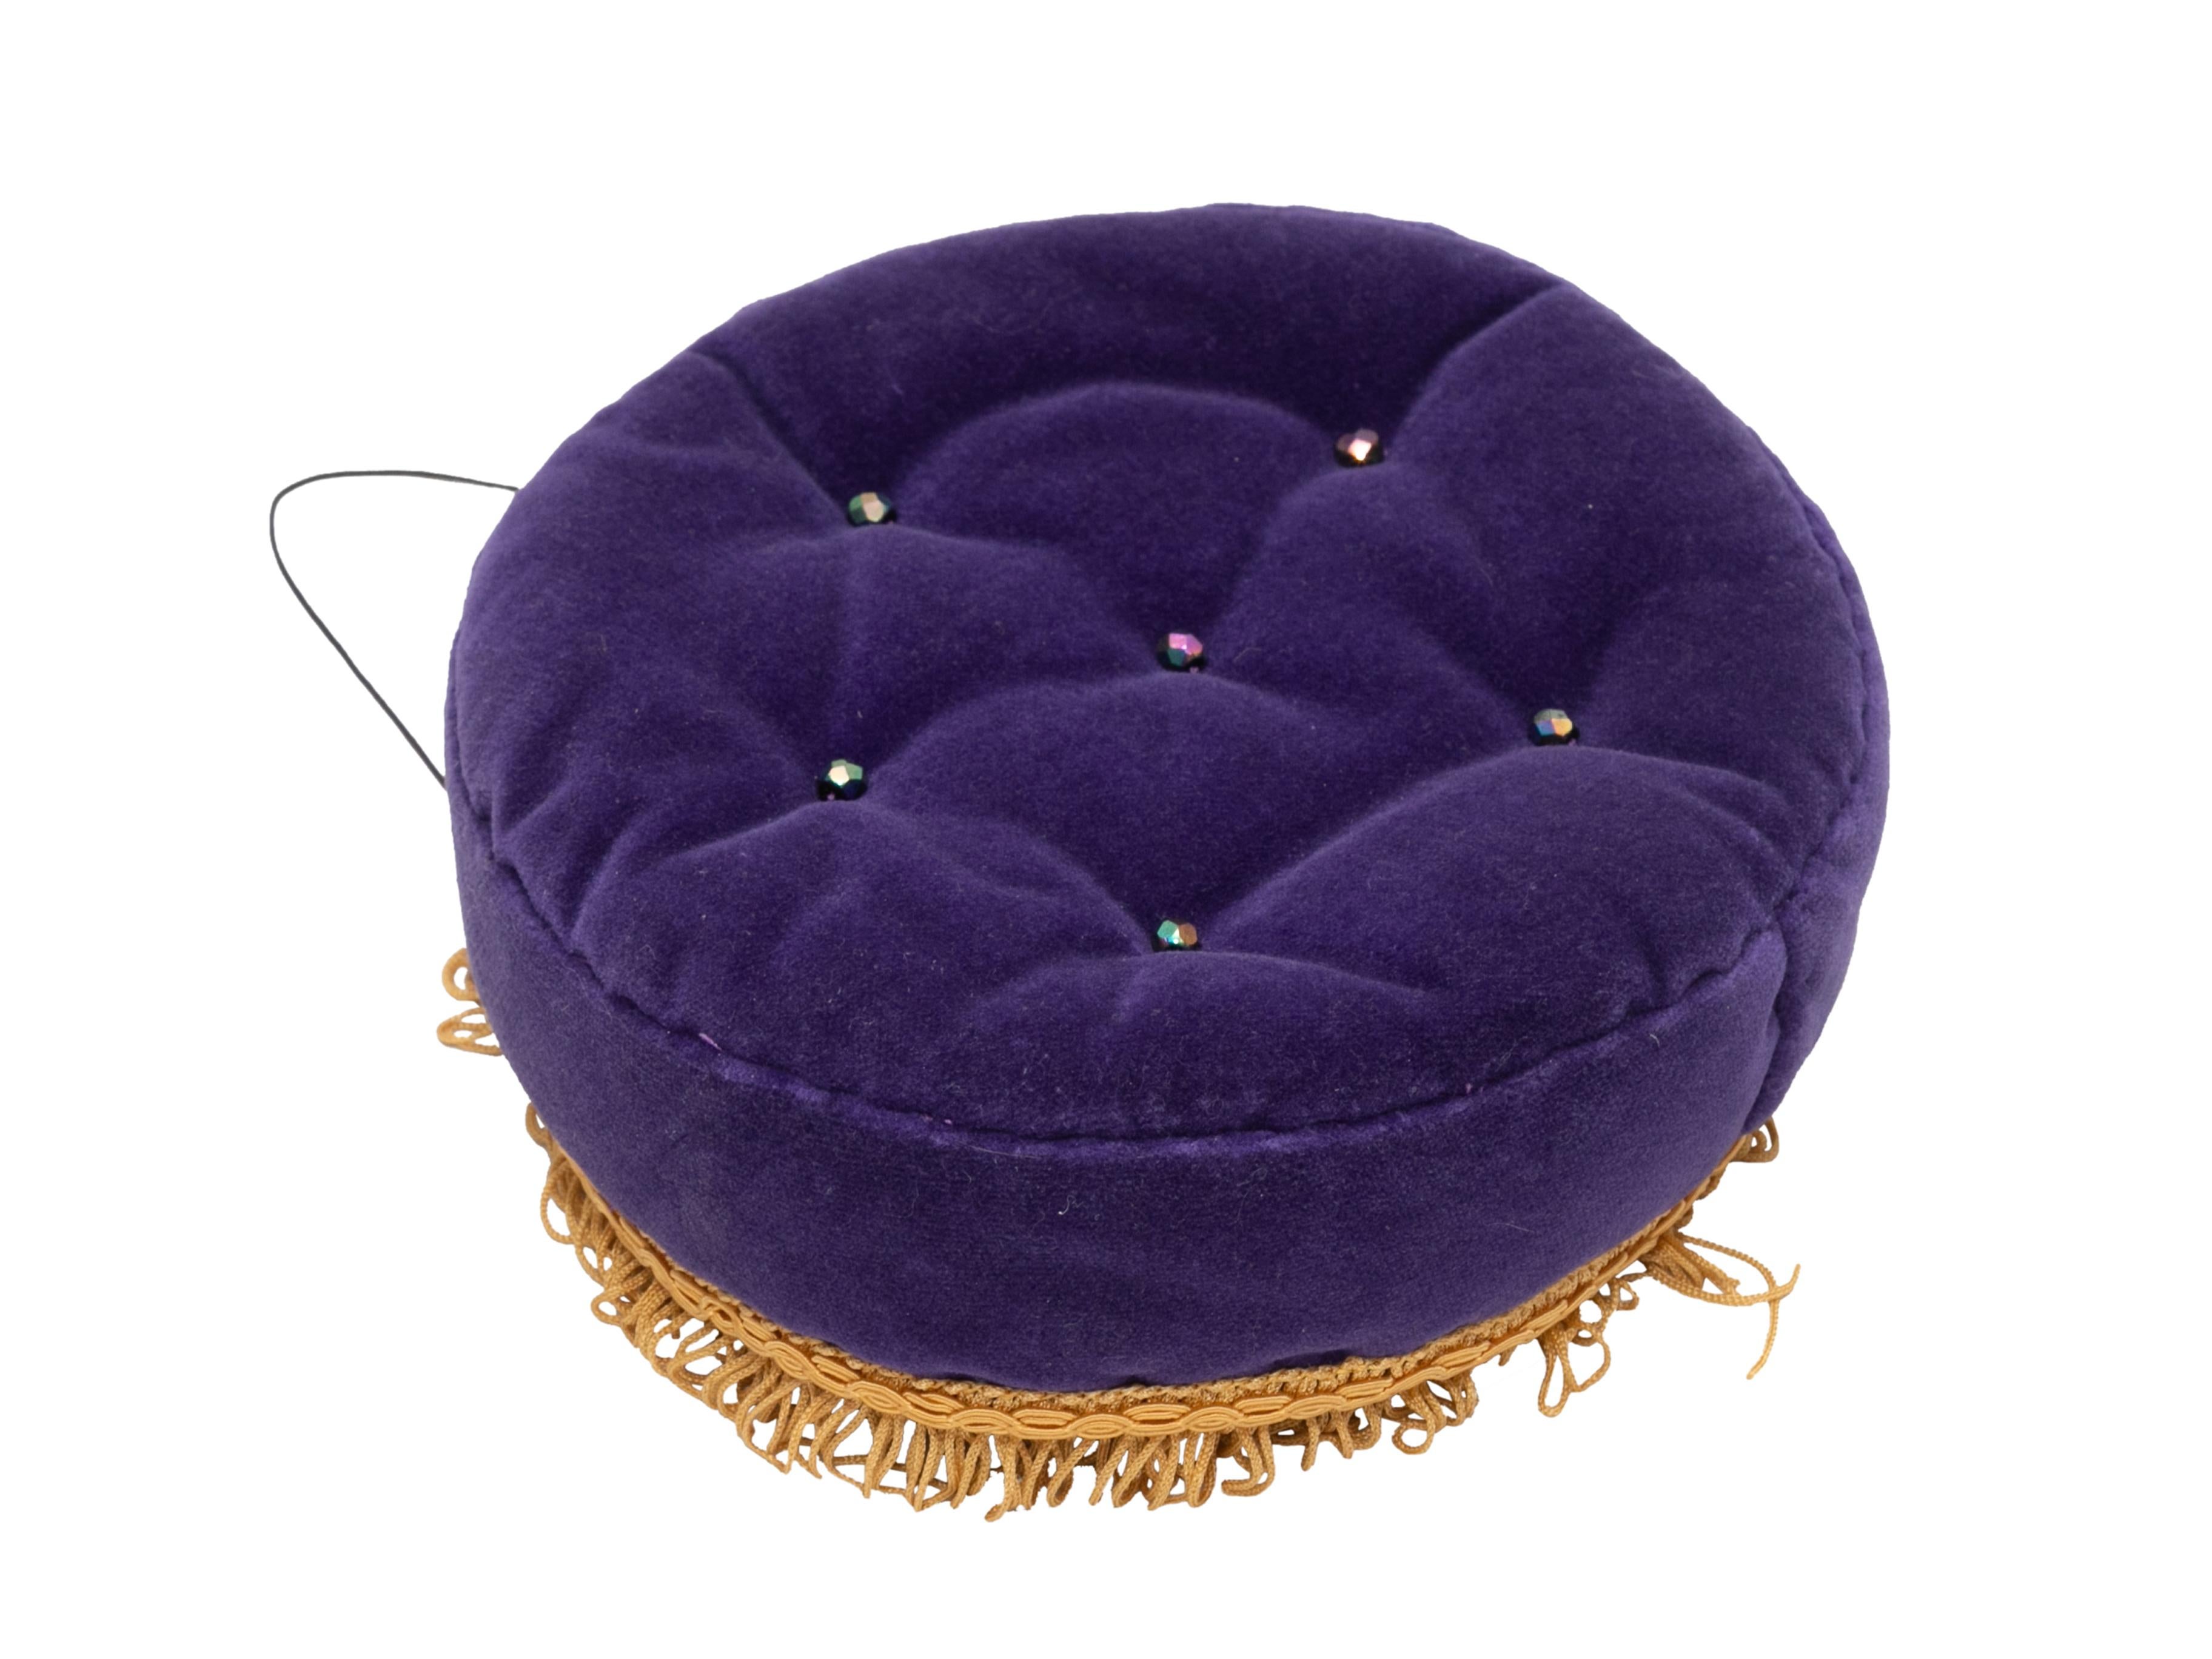 Vintage purple and gold cushion hat by Karl Lagerfeld. Circa 1985. Fringe trim at edge. 3